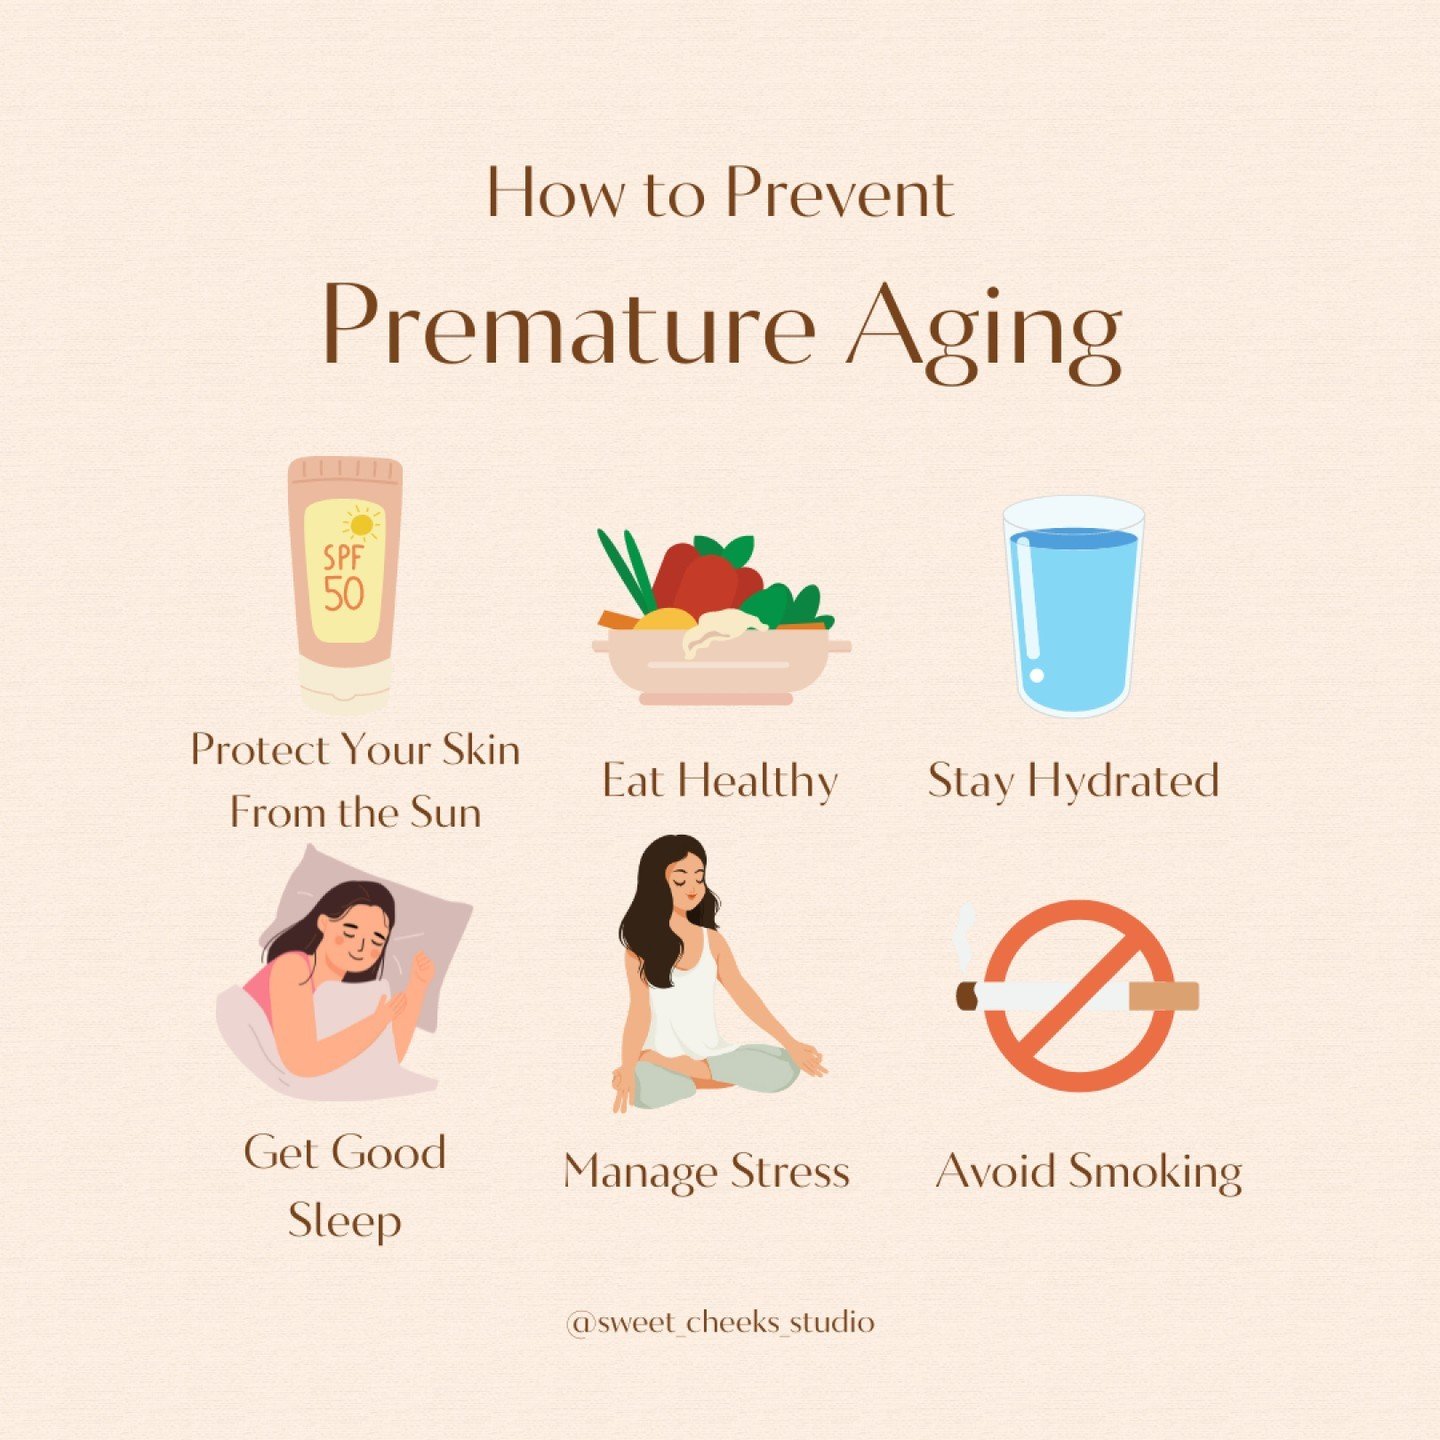 Here are six steps you can take to unlock the secrets of preventing premature aging! 
*
*
*
*
*
#temeculaskincare #temeculafacials #facials #temeculawaxing #waxing #beauty #Esthetician #temeculaesthetician #SkinCareRoutine #HealthySkin #GlowingSkin #